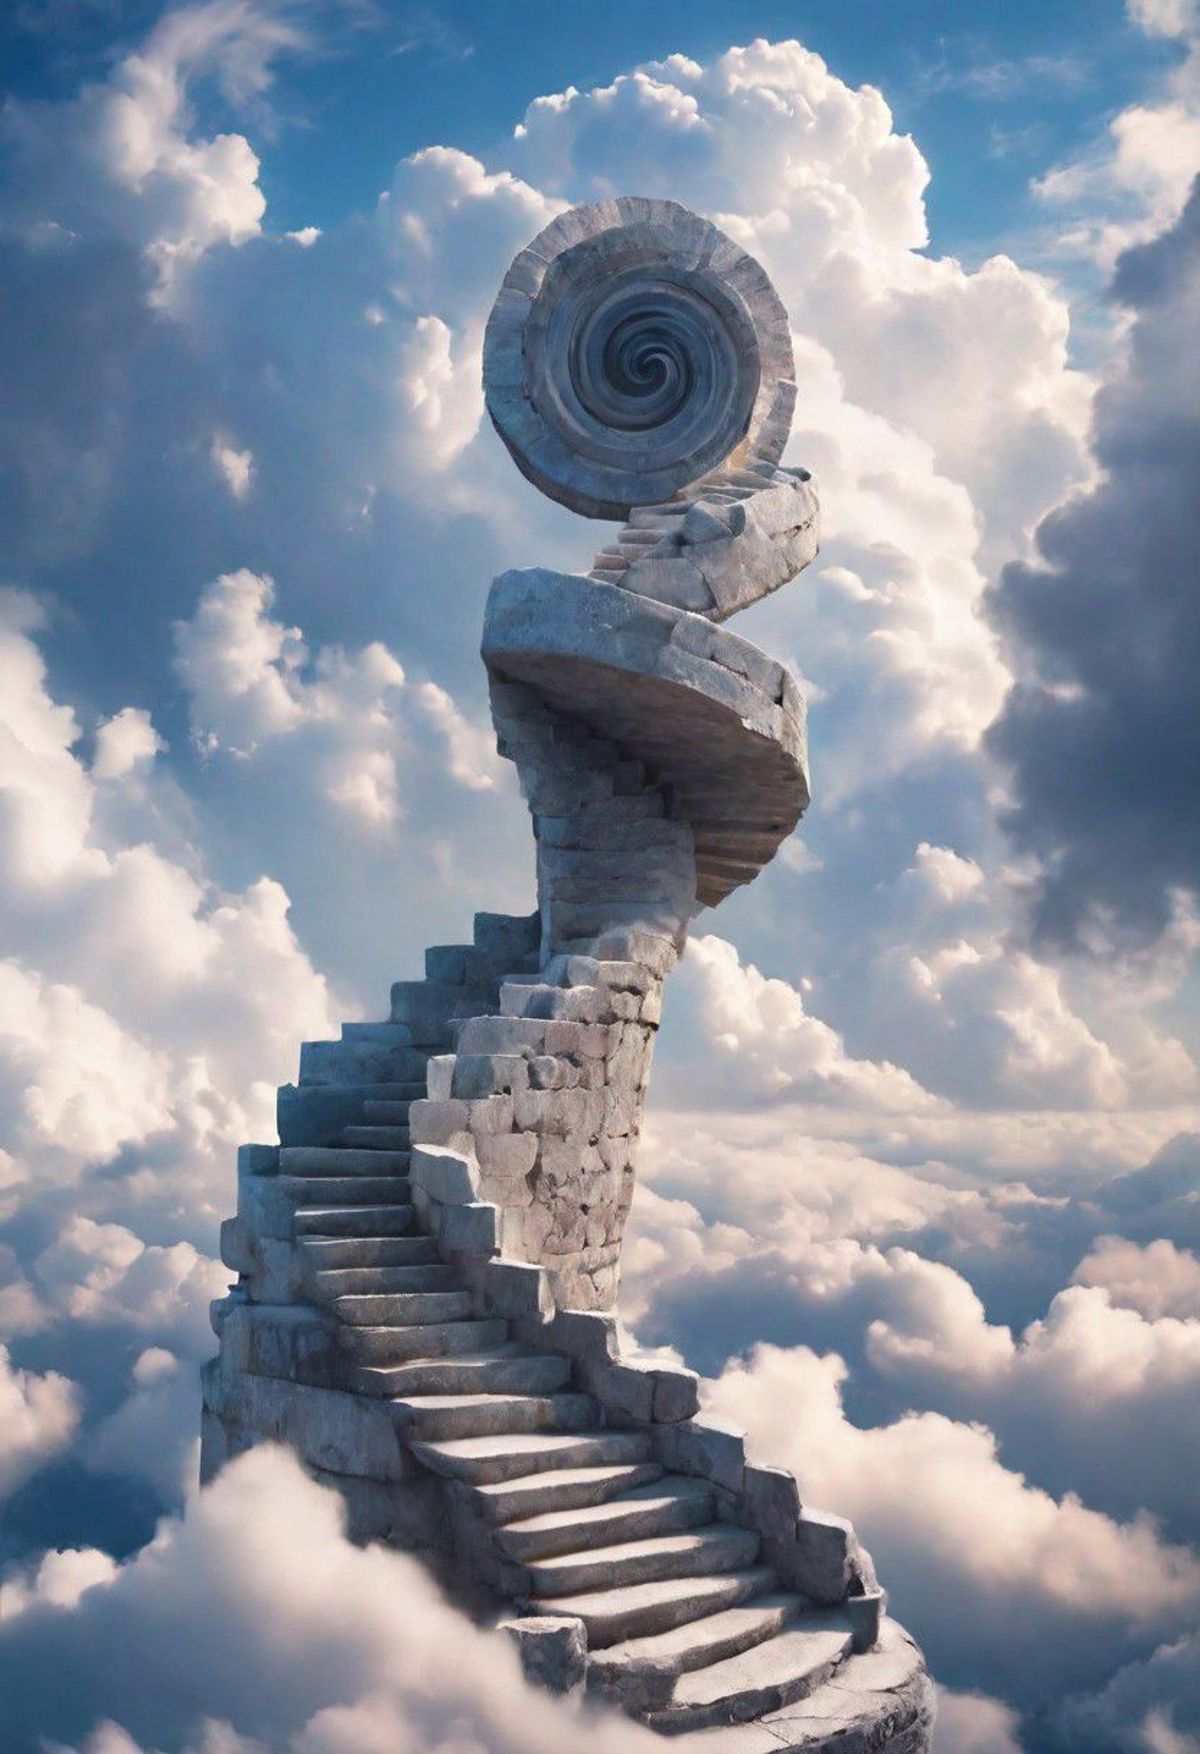 A set of stairs with a spiral on top, overlooking a cloudy sky.